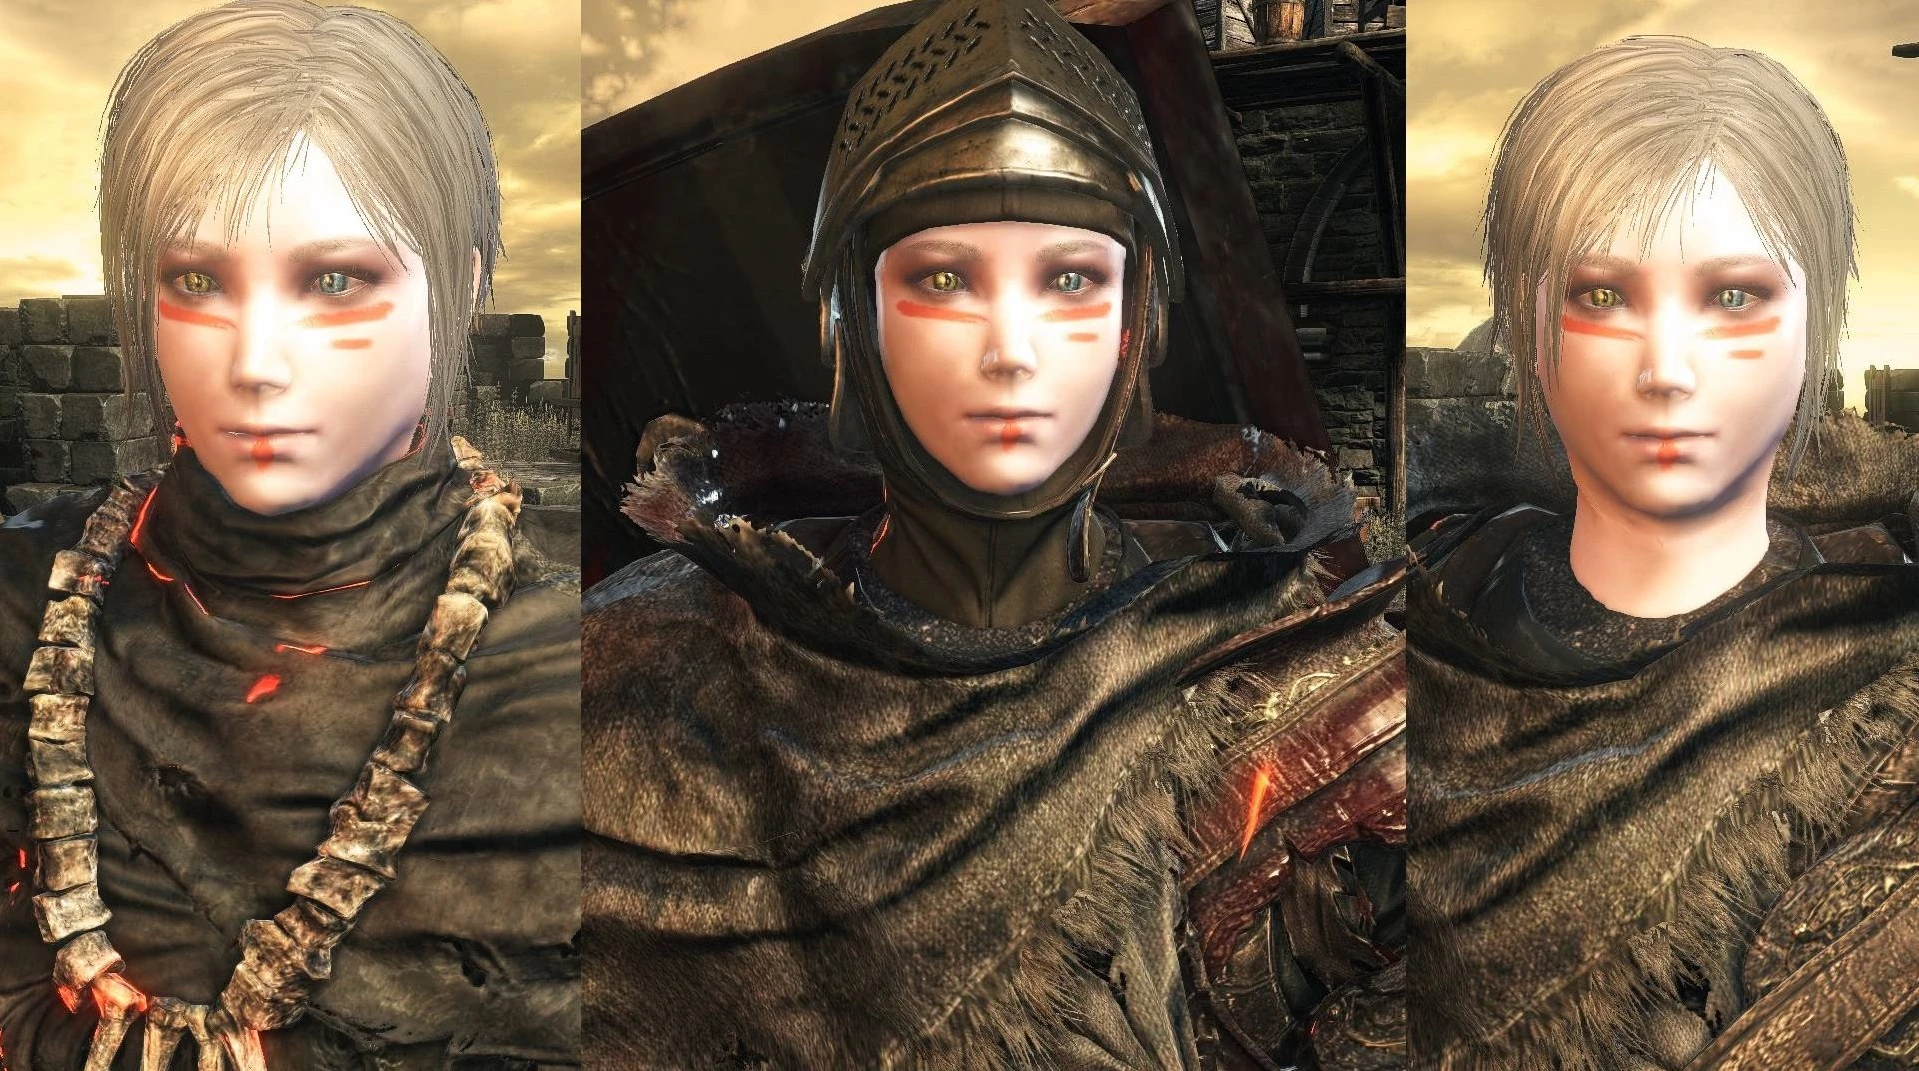 graphical mod for dark souls 2